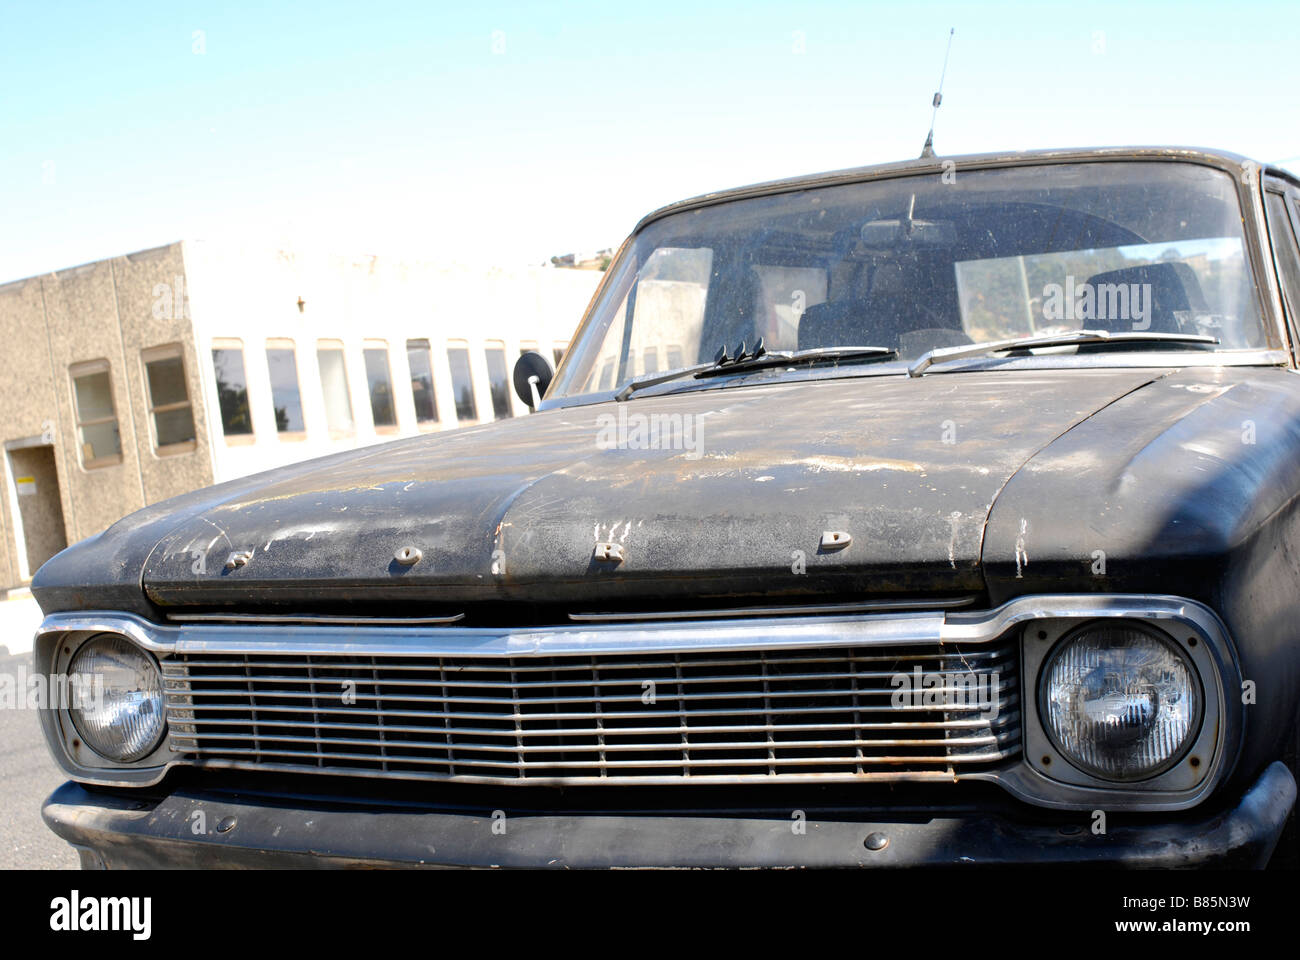 Old Ford stationwagon with rat look distressed paintowrk Stock Photo